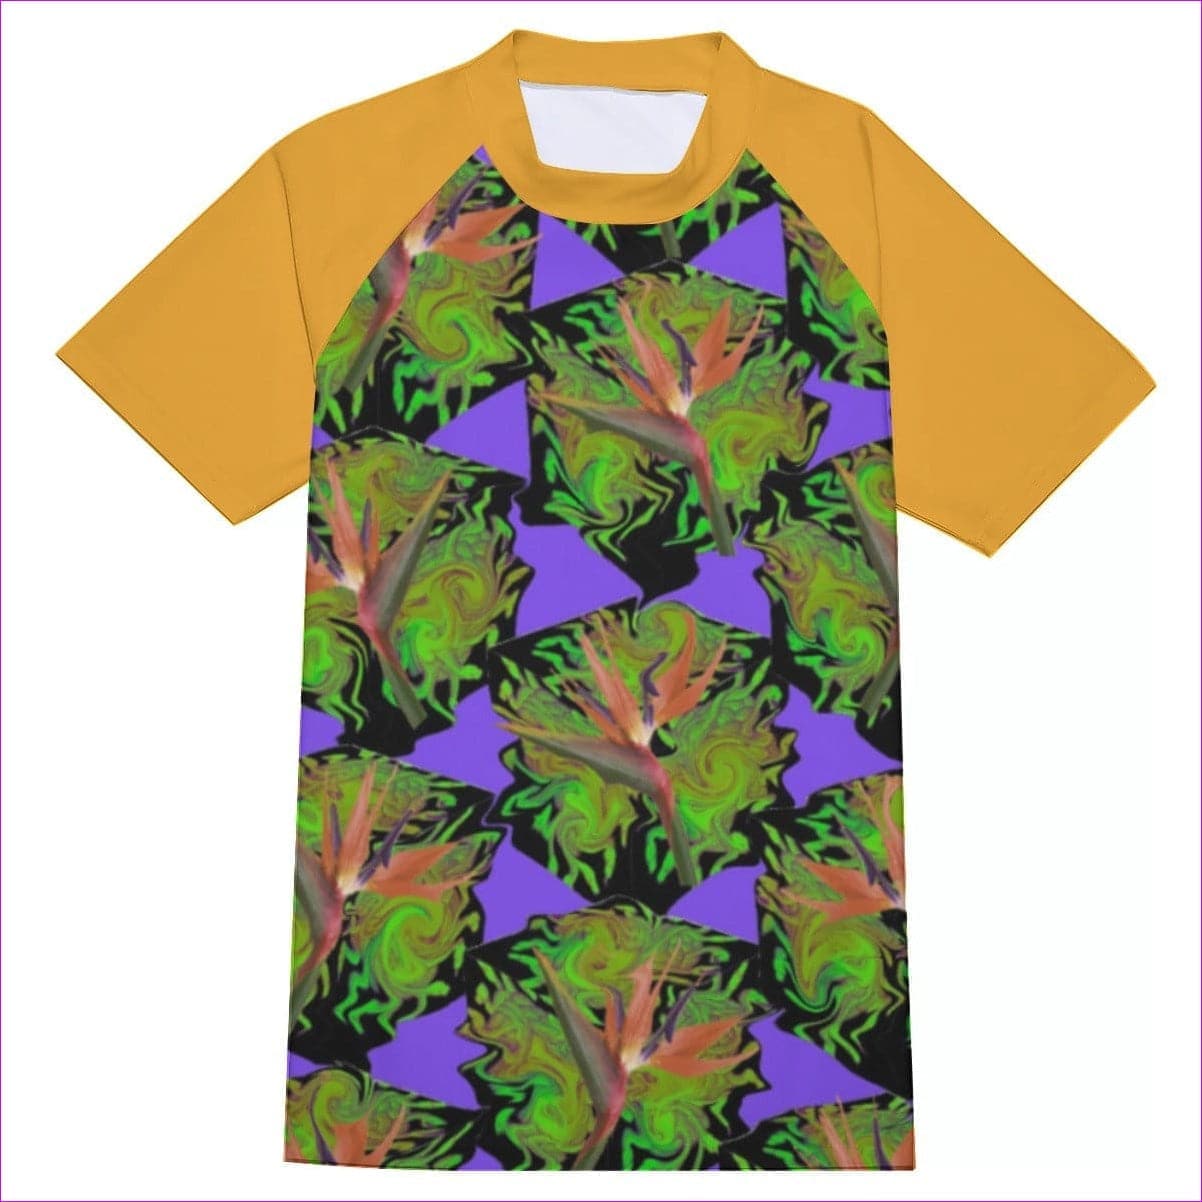 Psychedelic Paradise Men's Tight Surf Shirt With Half Sleeves - men's surf tee at TFC&H Co.